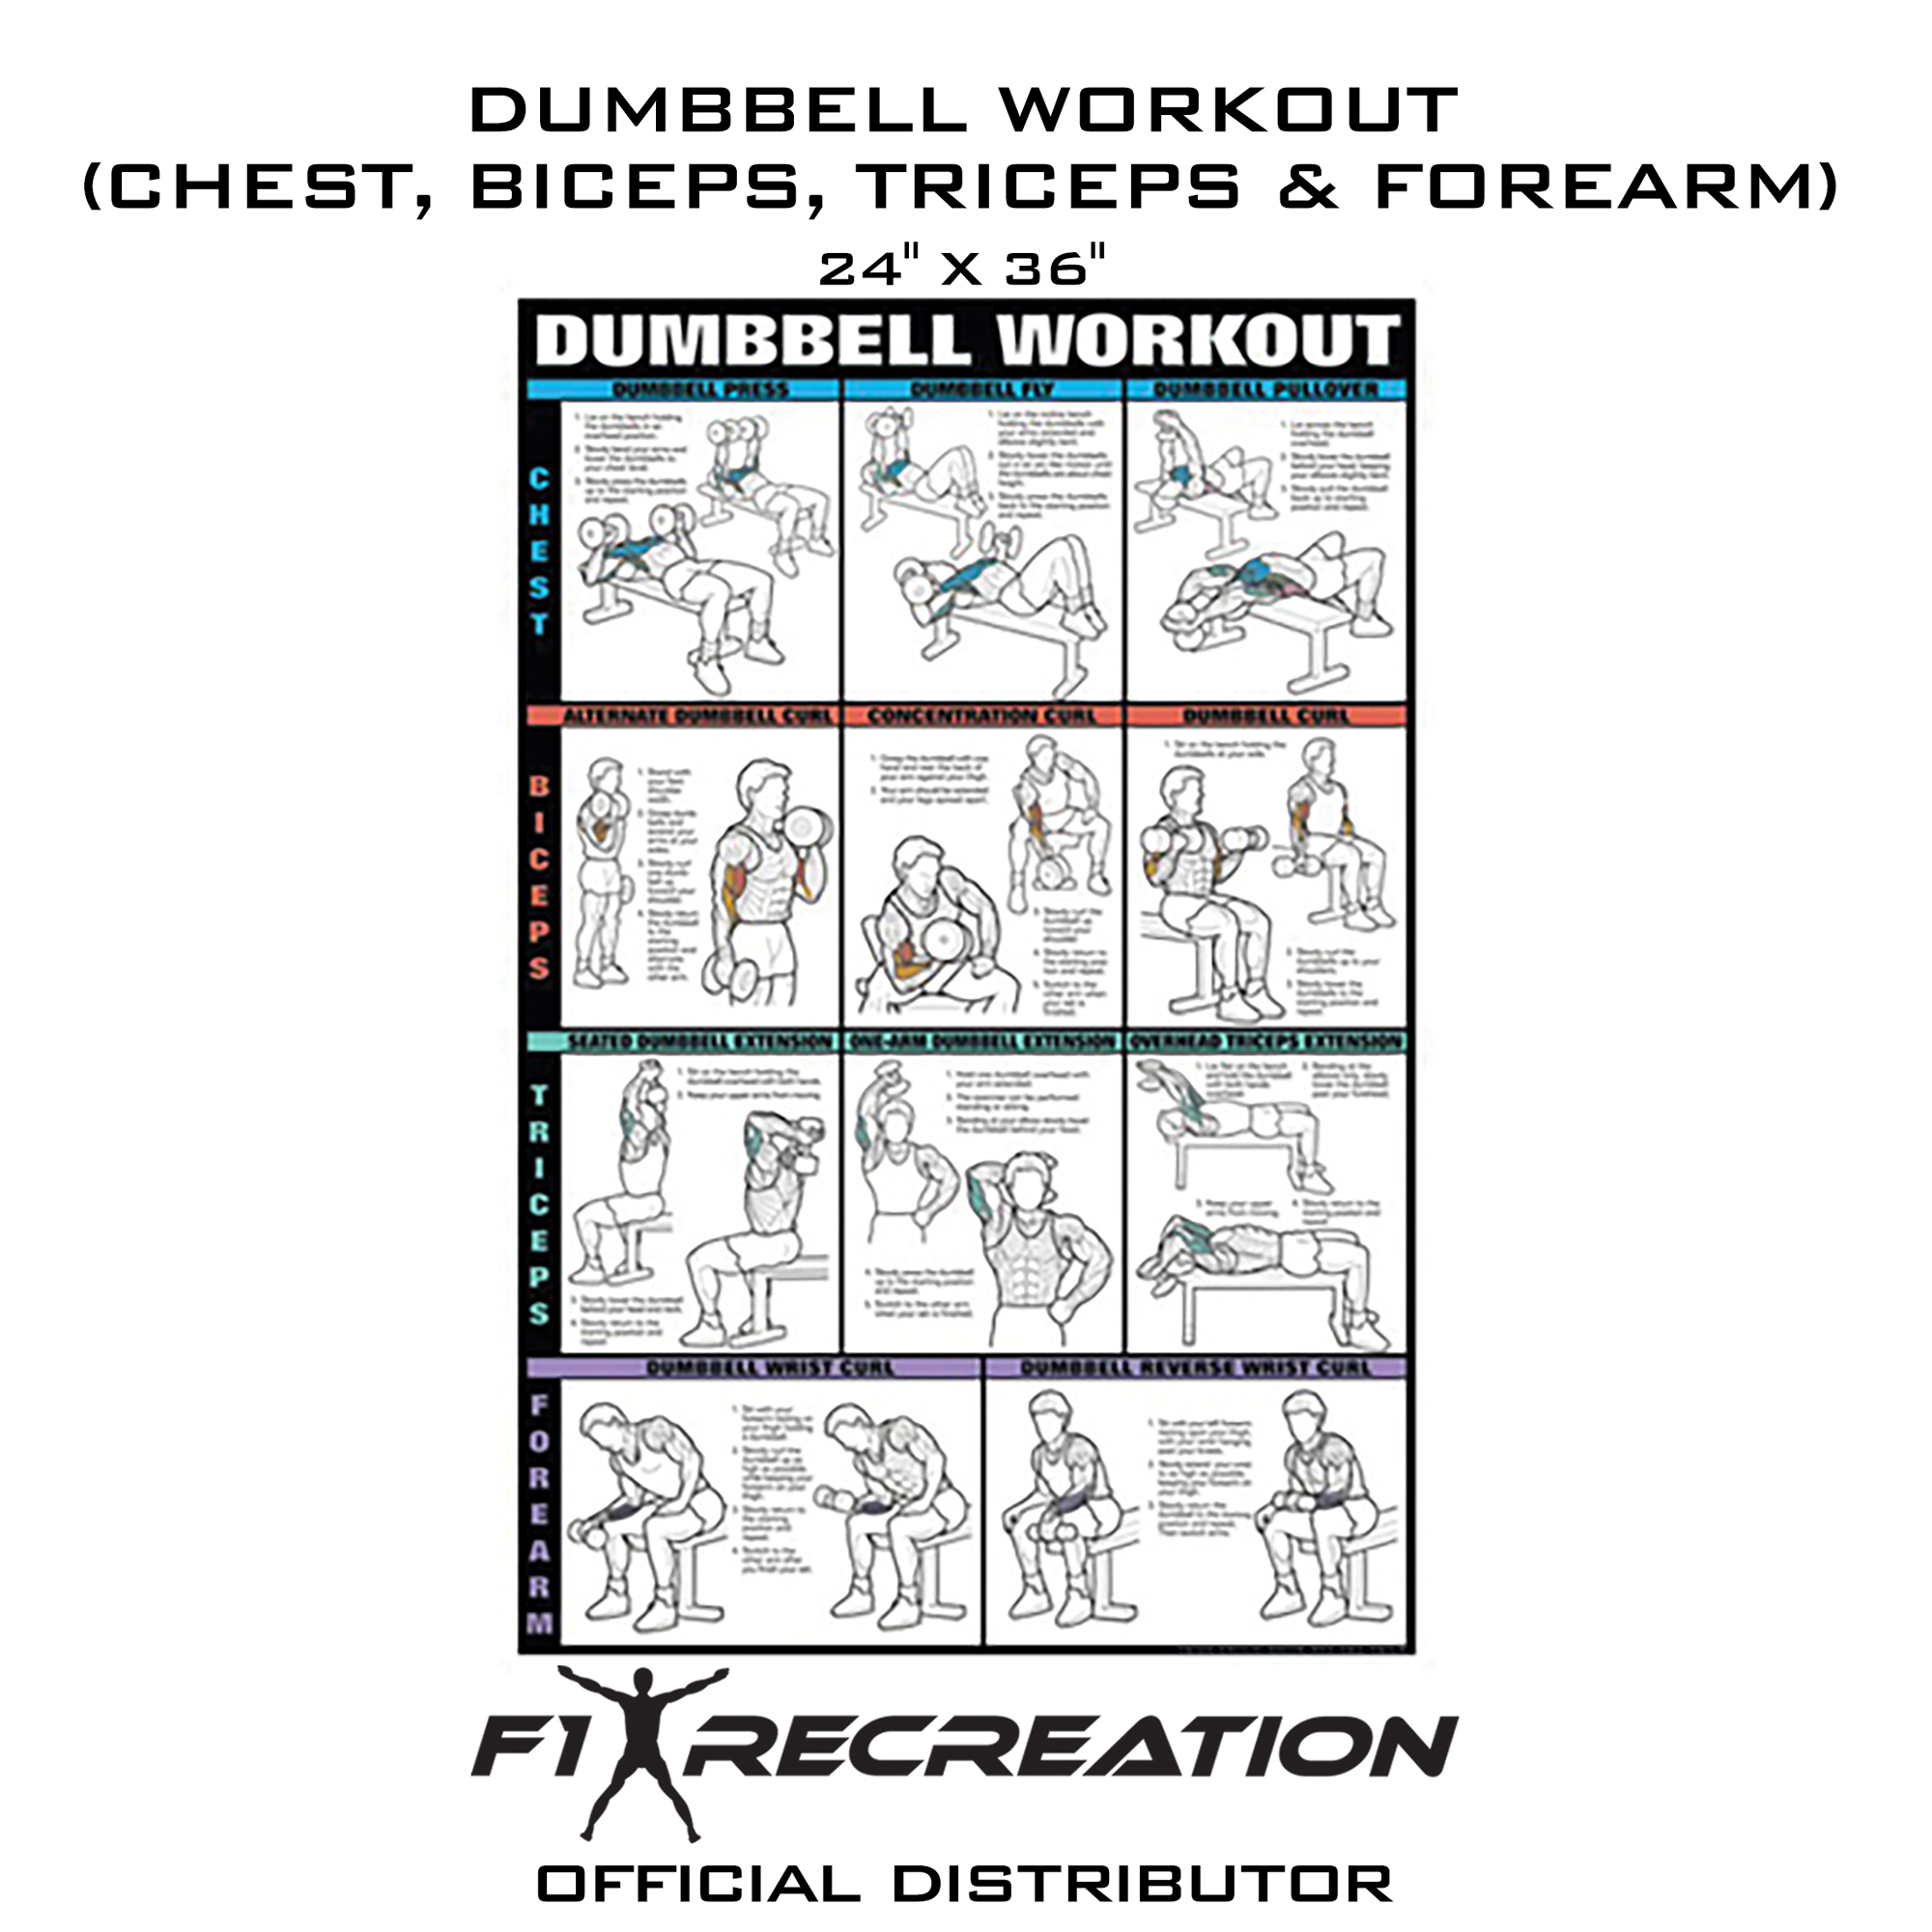 F1 Recreation Original Dumbbell Workout Poster (Chest, Biceps, Triceps ...